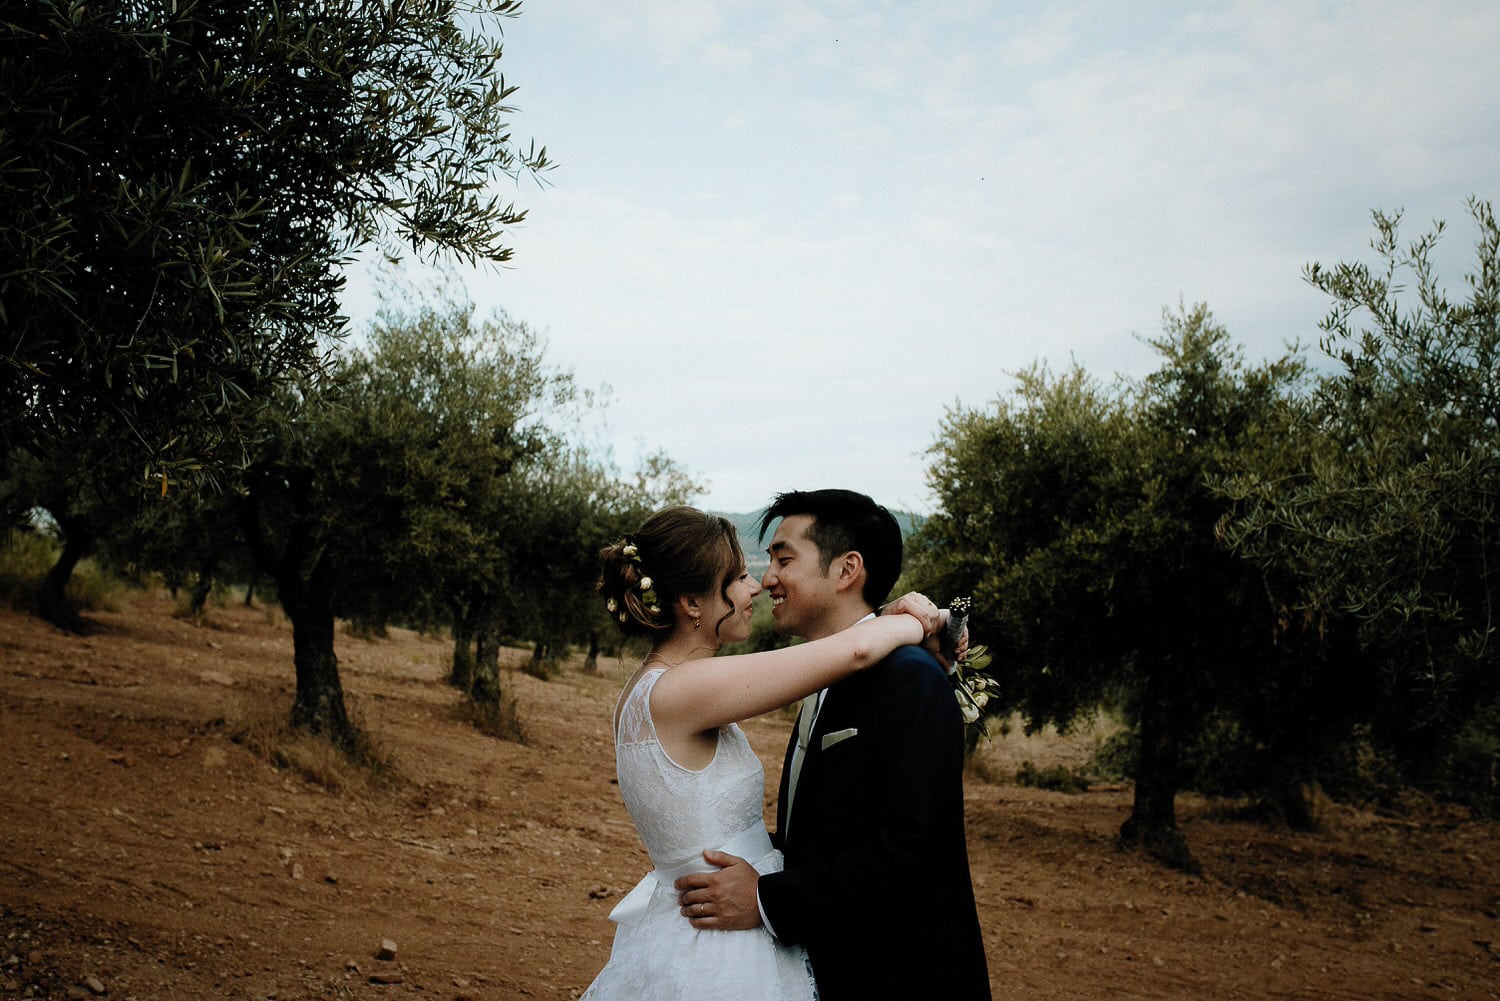 Charming Destination Wedding in the Portuguese Countryside - multicultural wedding in rural village